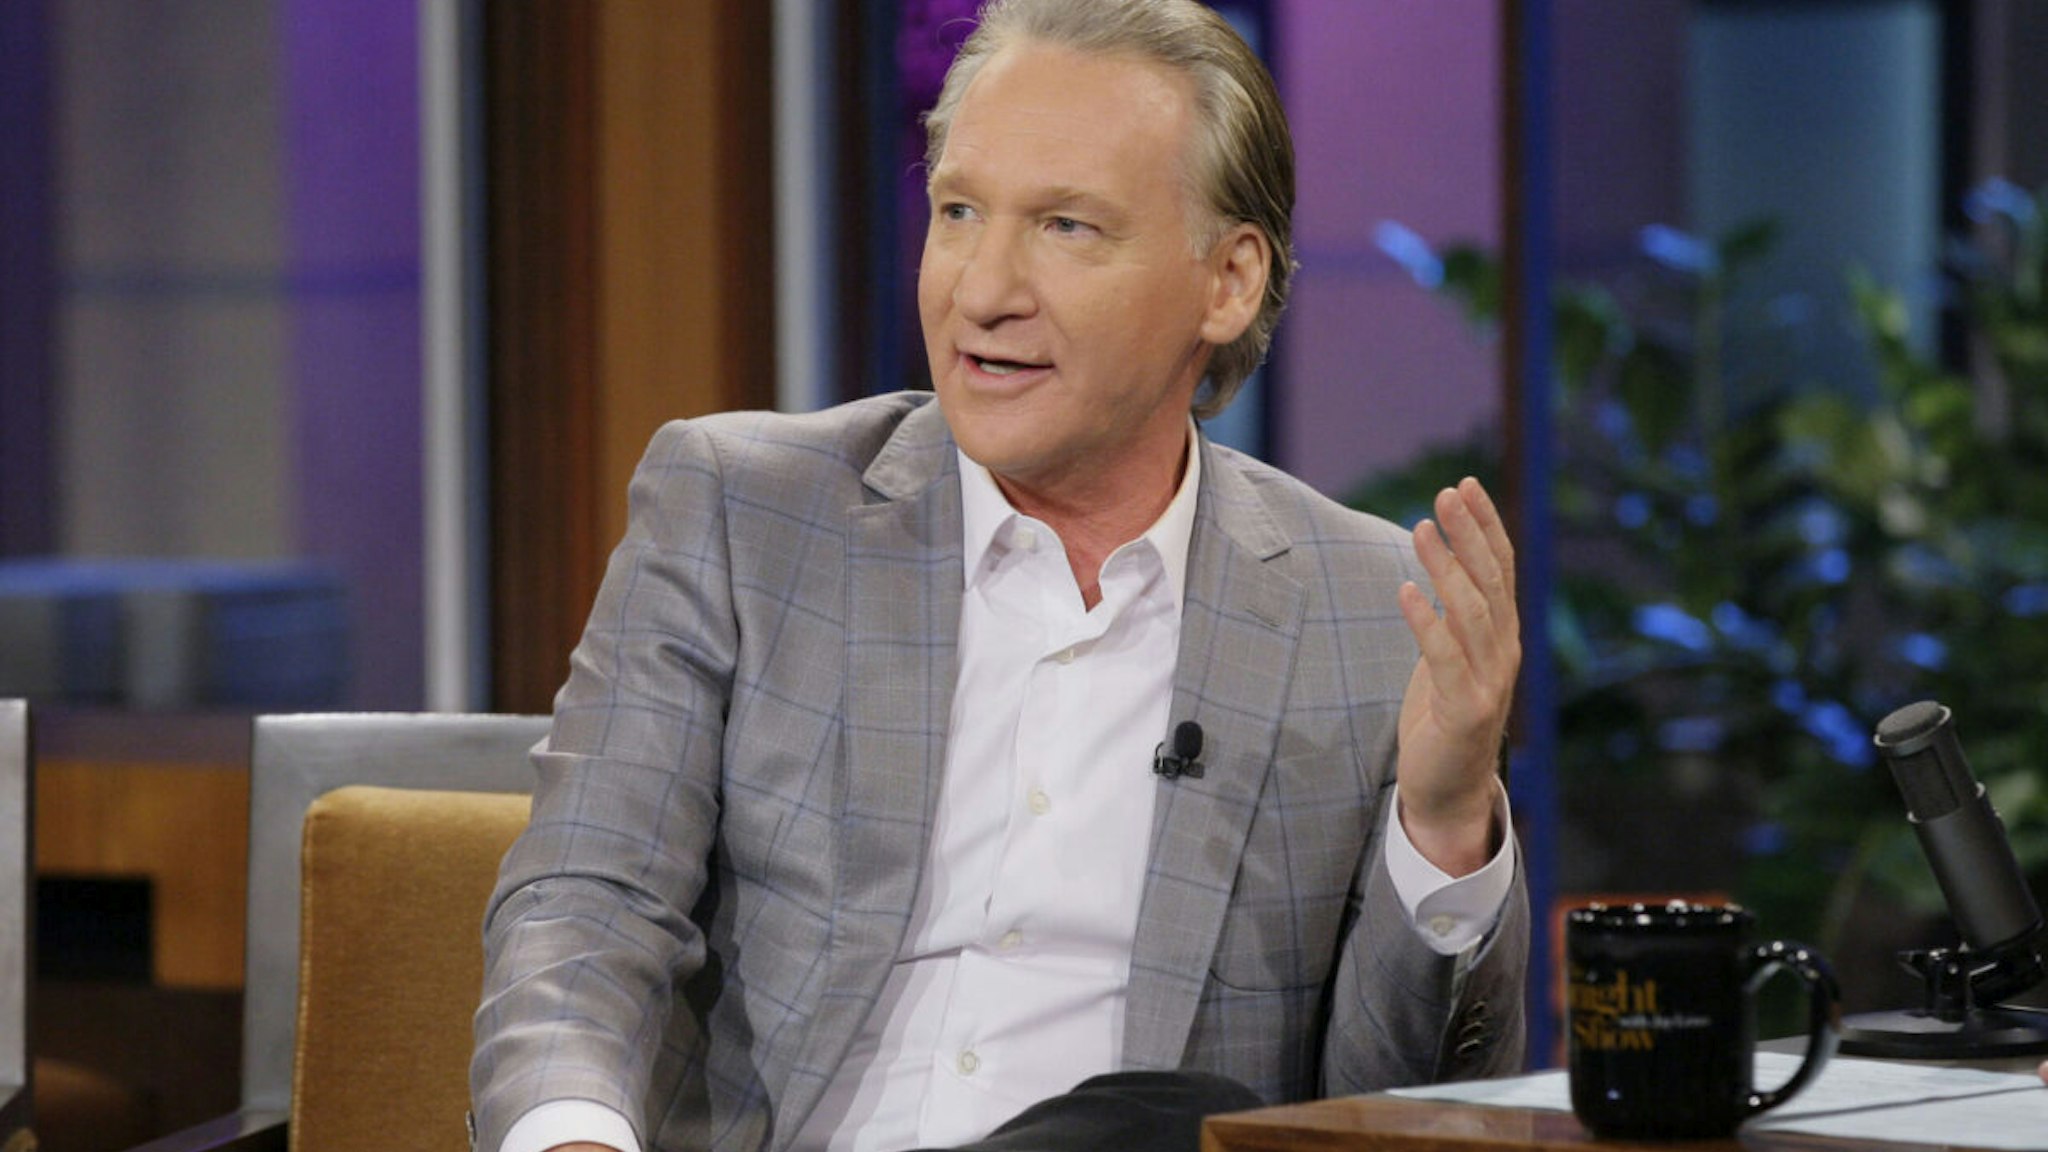 Comedian Bill Maher during an interview on September 3, 2013